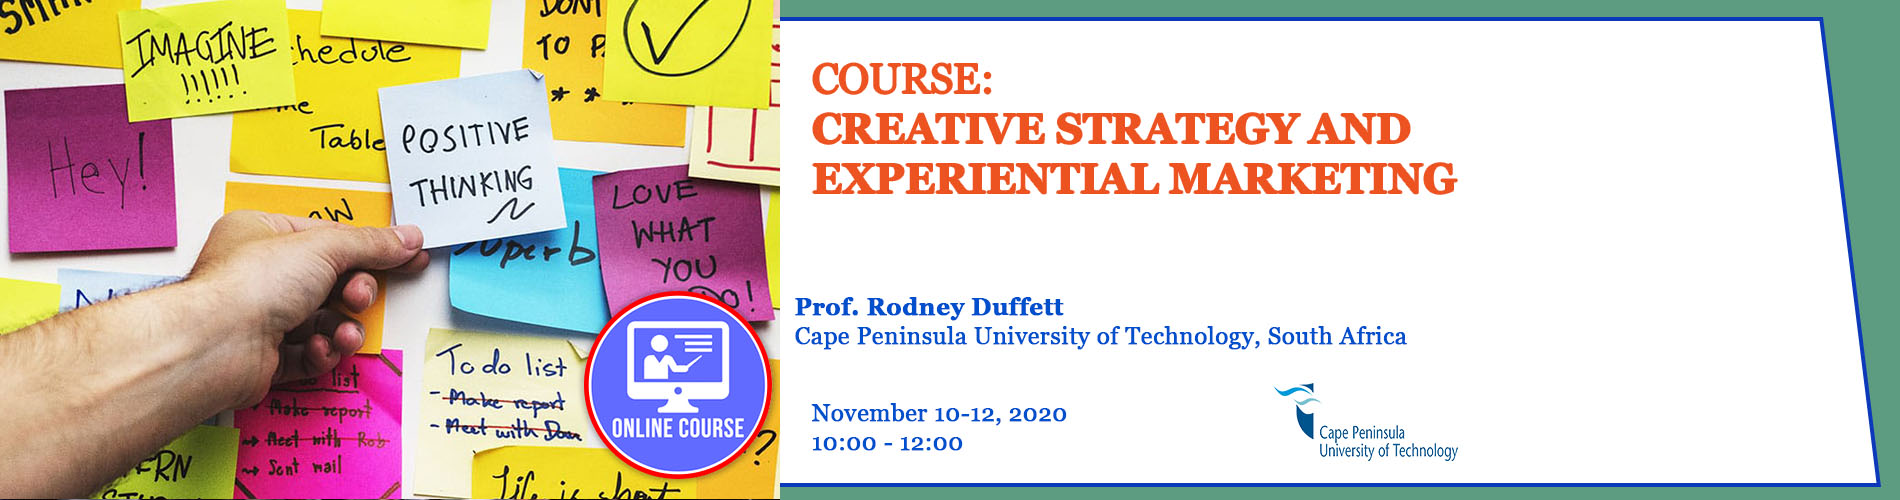 10.11.2020-Creative Strategy and Experiential Marketing